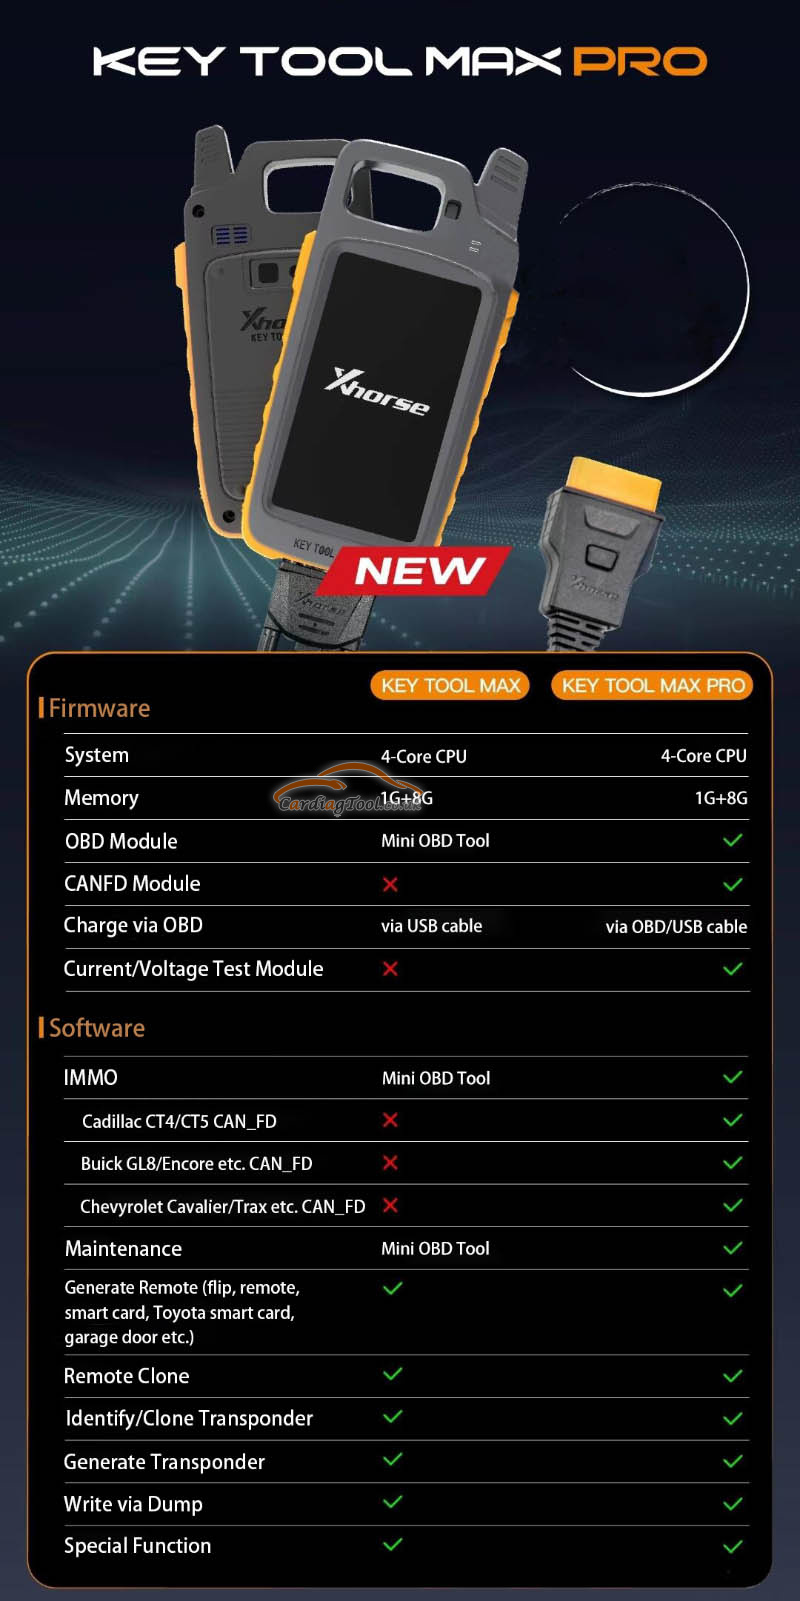 xhorse-vvdi-key-tool-max-pro-function-and-comparison-2